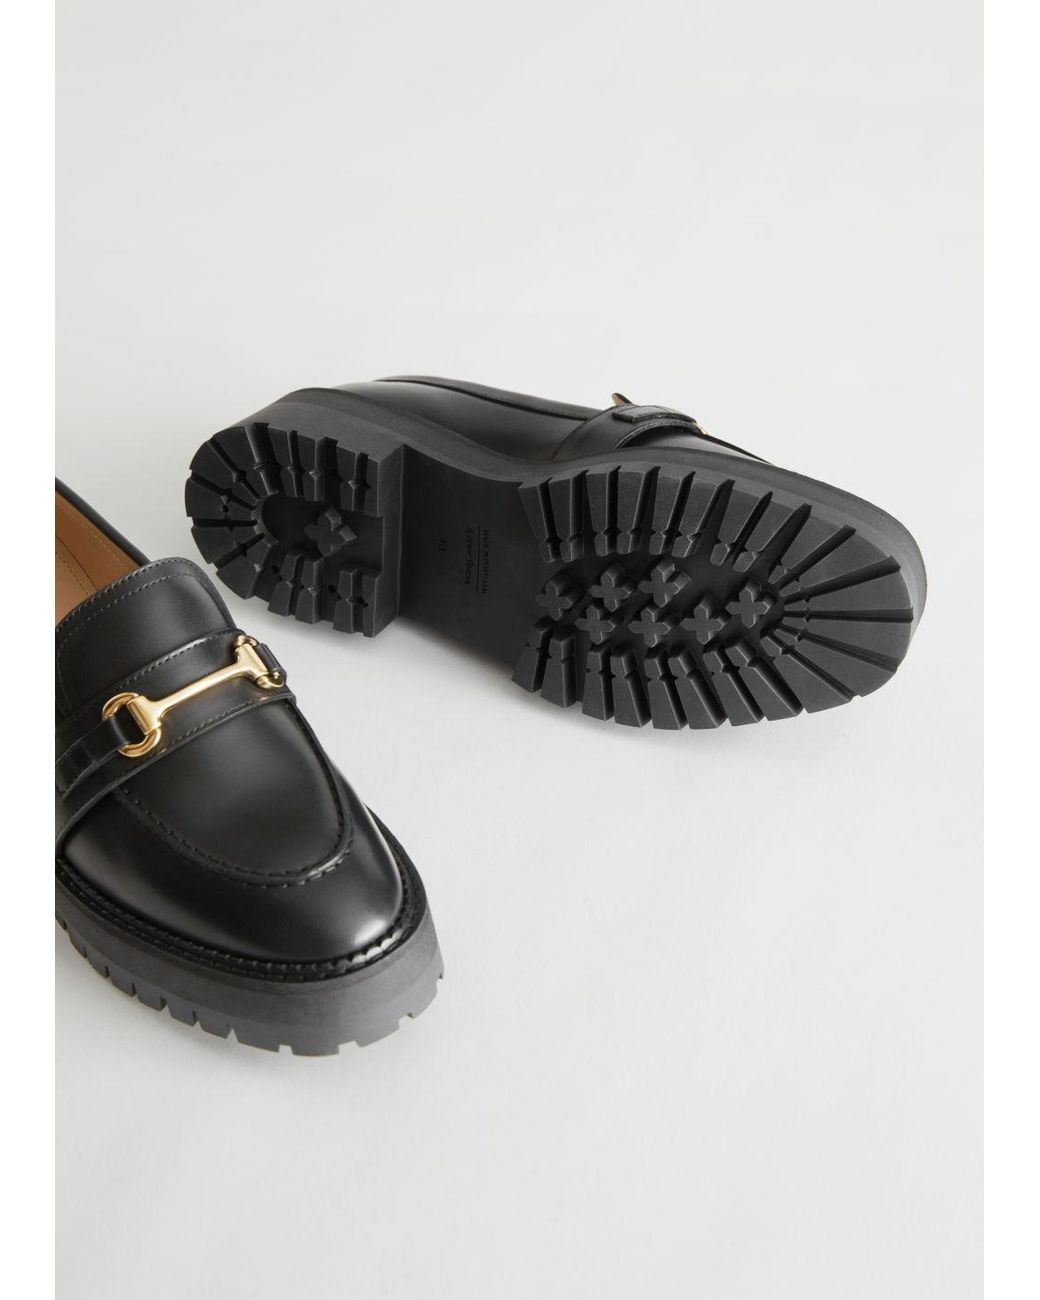 cabriolet Blind tillid Asien & Other Stories Buckled Chunky Leather Loafers in Black | Lyst